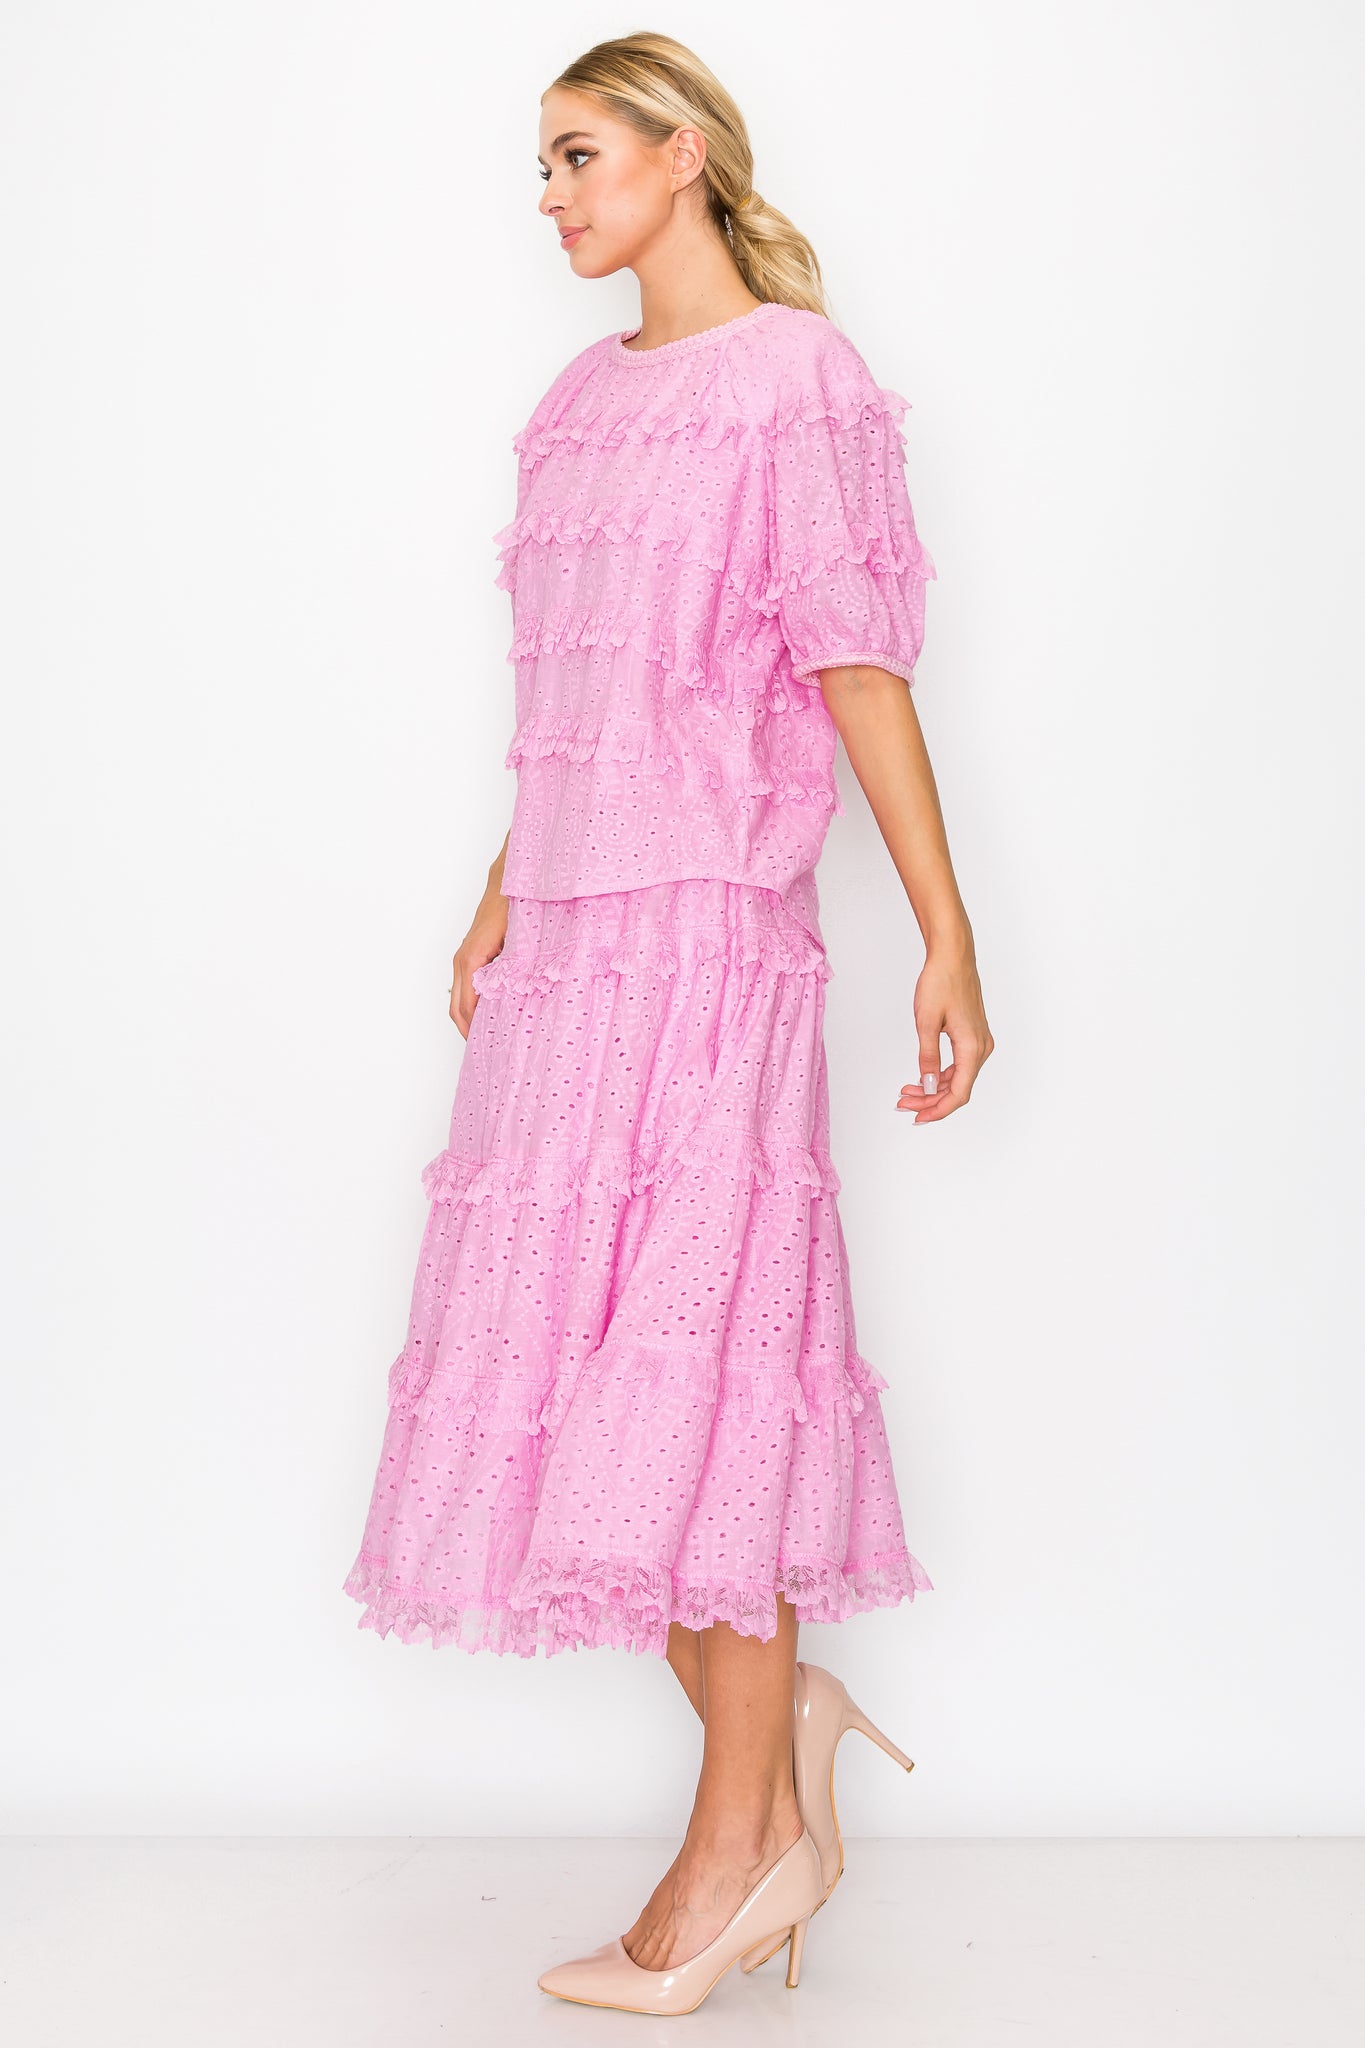 Pink Ruffle Sleeved Dress - Lizzie in Lace